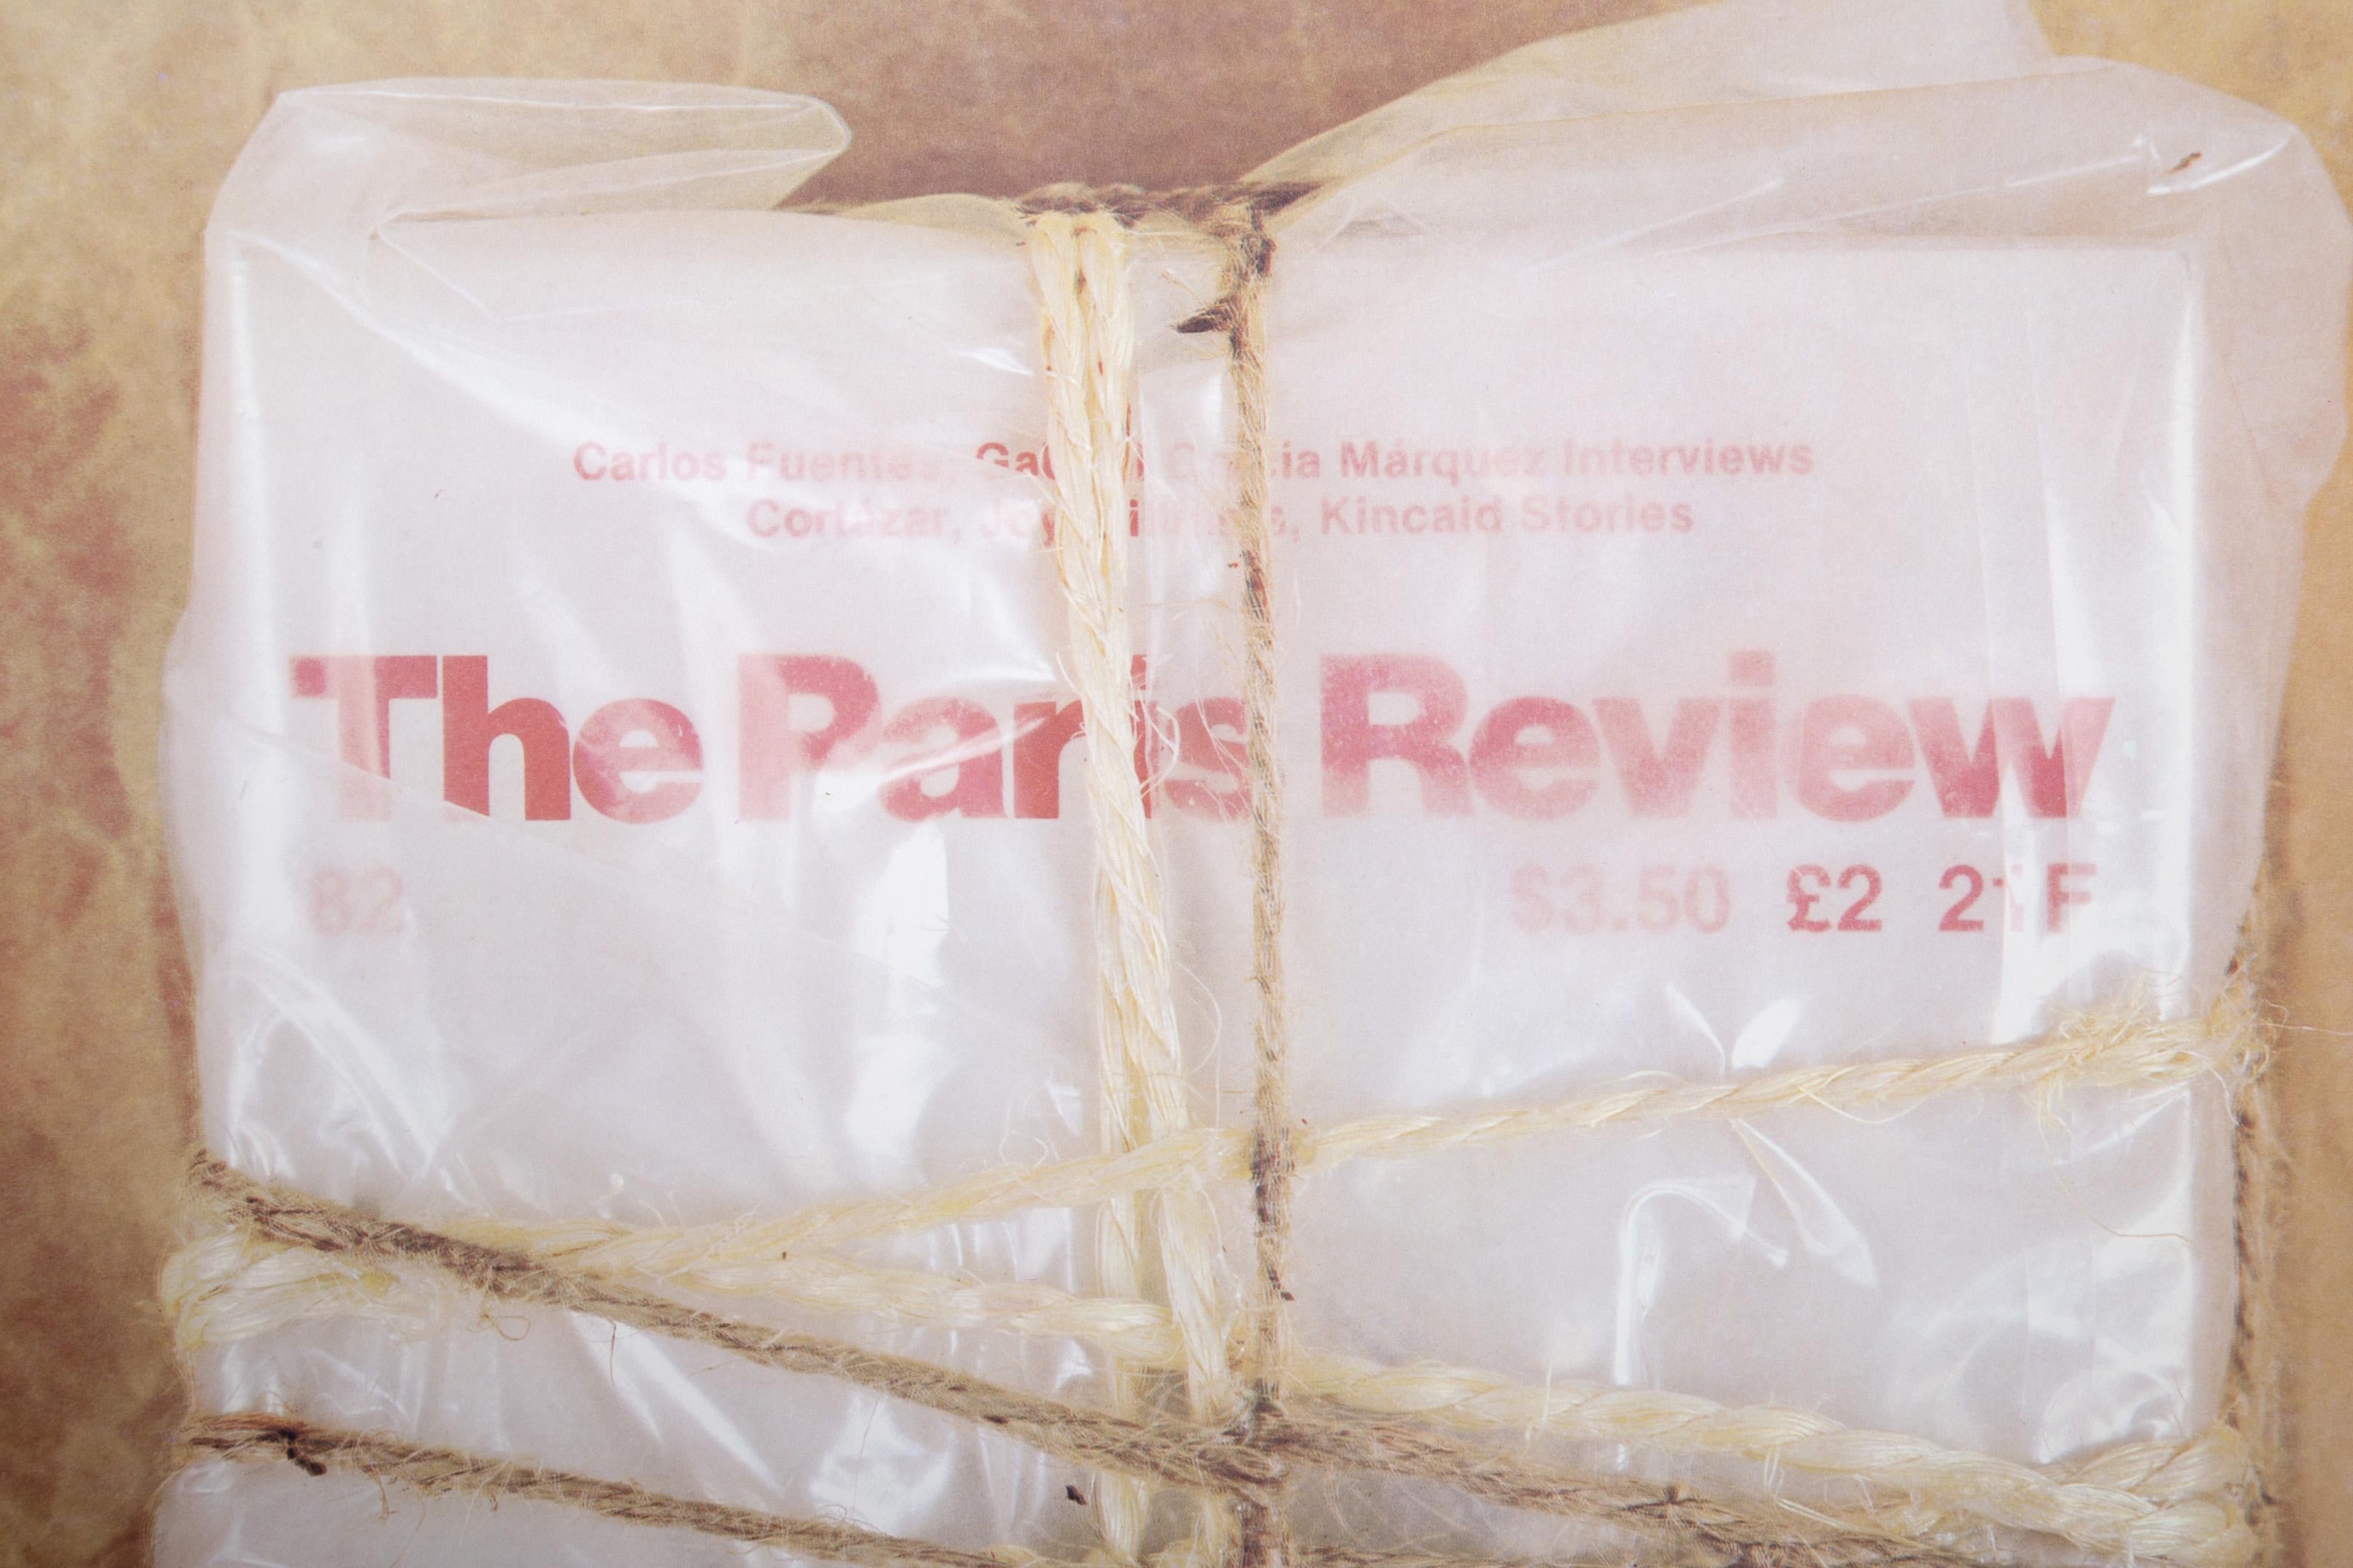 Wrapped Paris Review, Offset Lithograph by Christo and Jeanne-Claude For Sale 2